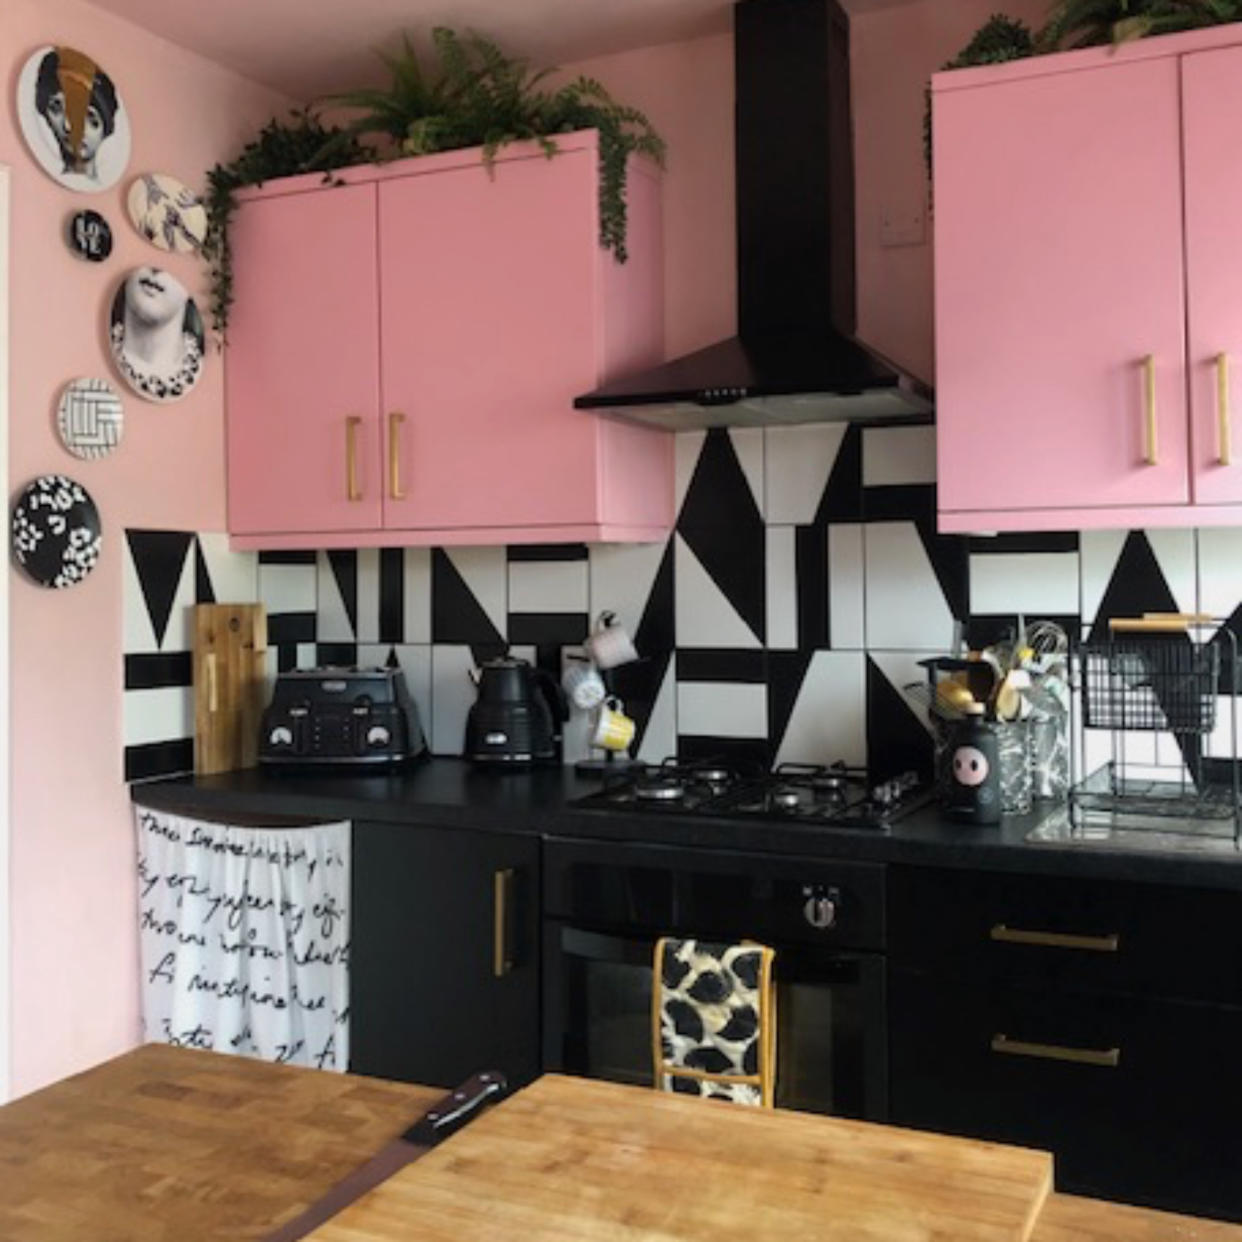  Kitchen with pink cabinets and monochrome tiles. 